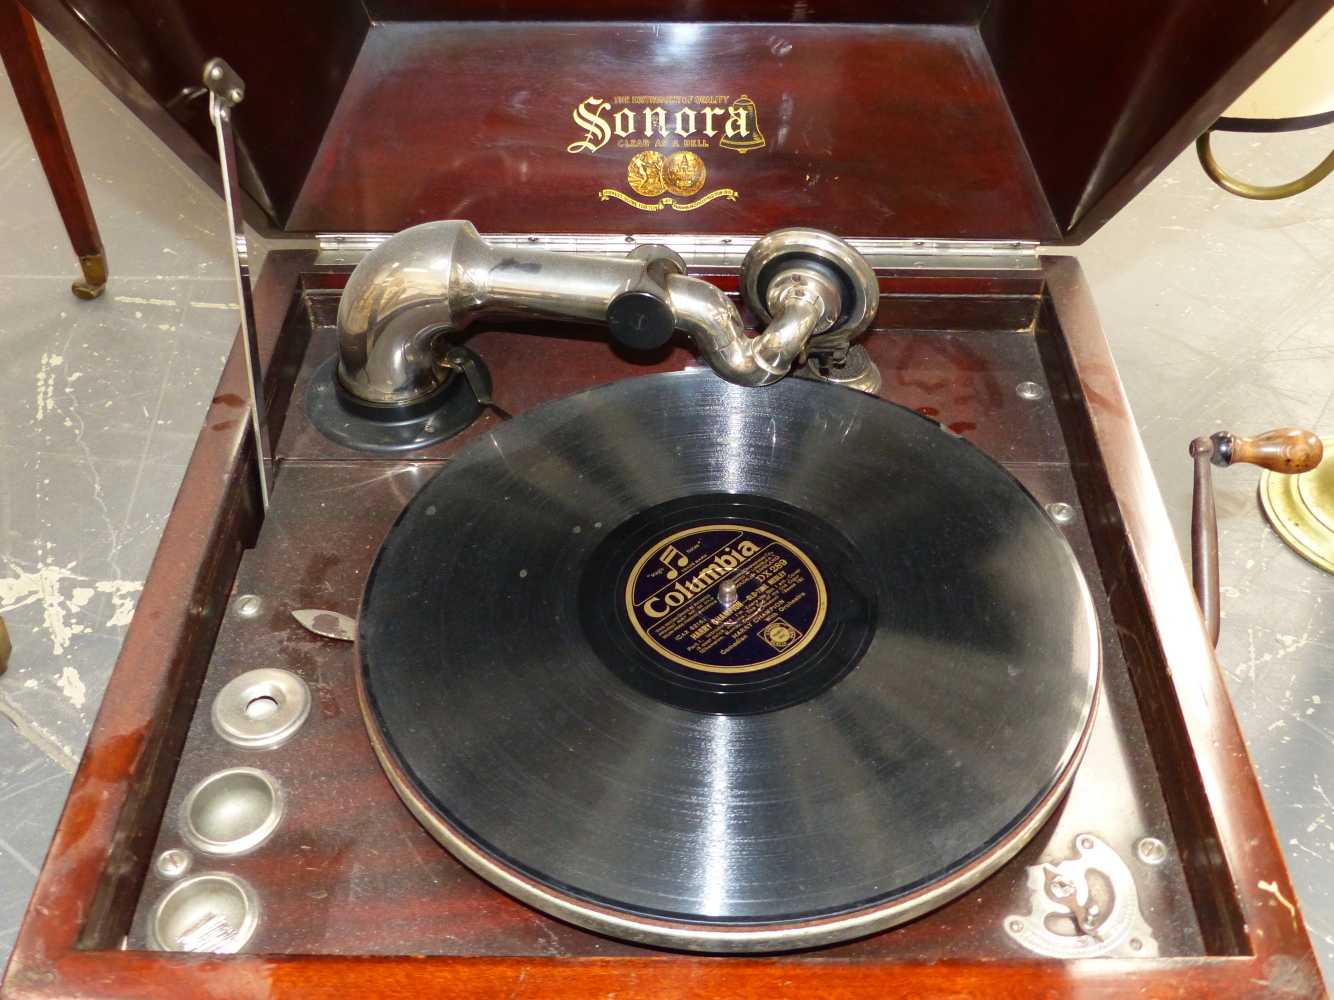 A MAHOGANY STAINED CASED SONORA WIND UP GRAMOPHONE, THE TURNTABLE ABOVE AN ALTERNATING ARROW AND - Image 2 of 7